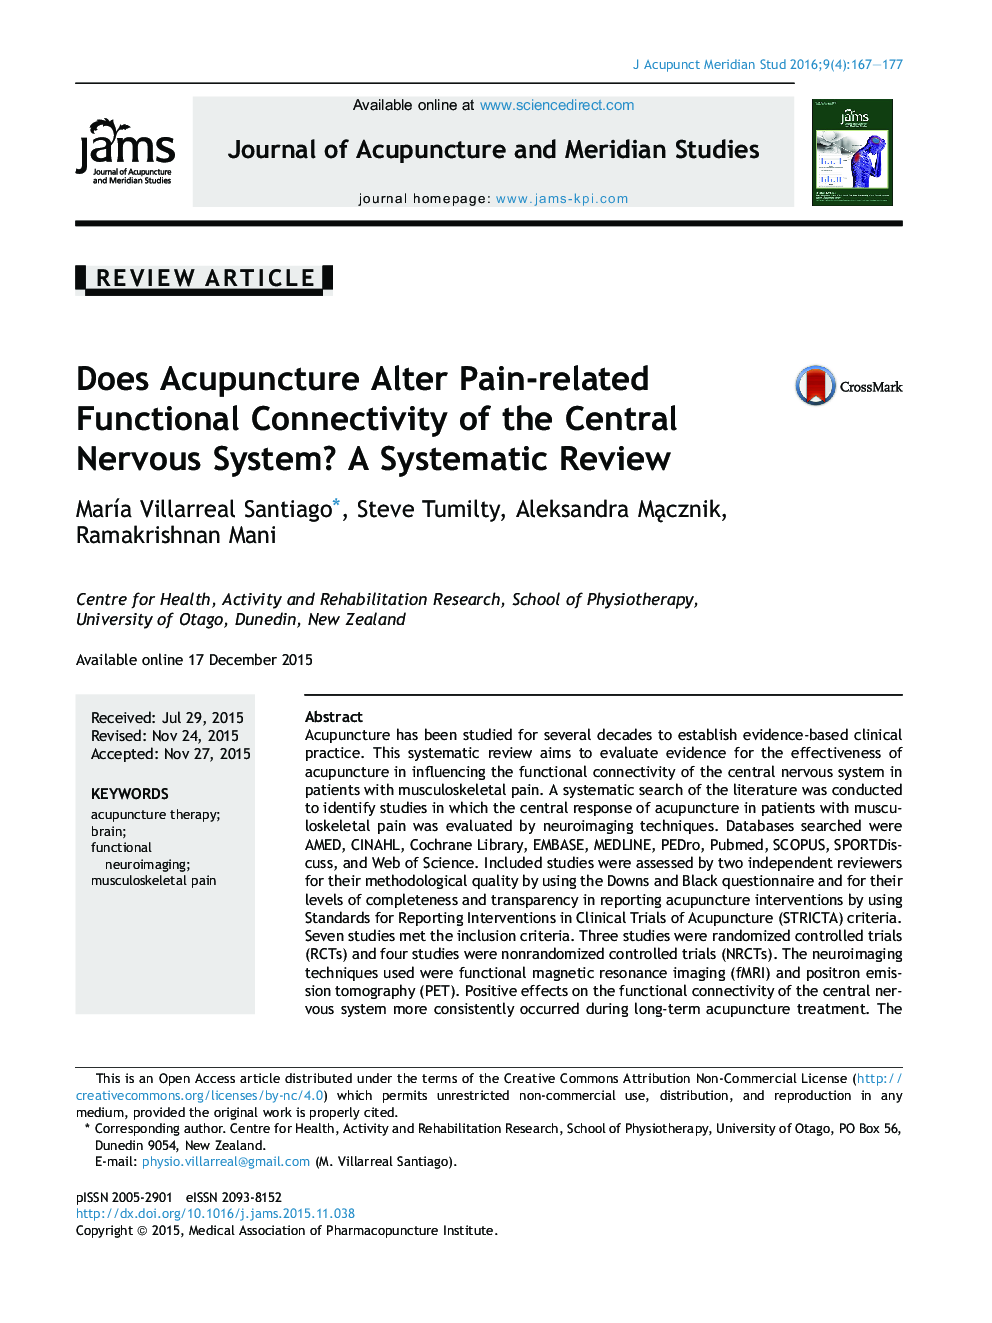 Does Acupuncture Alter Pain-related Functional Connectivity of the Central Nervous System? A Systematic Review 